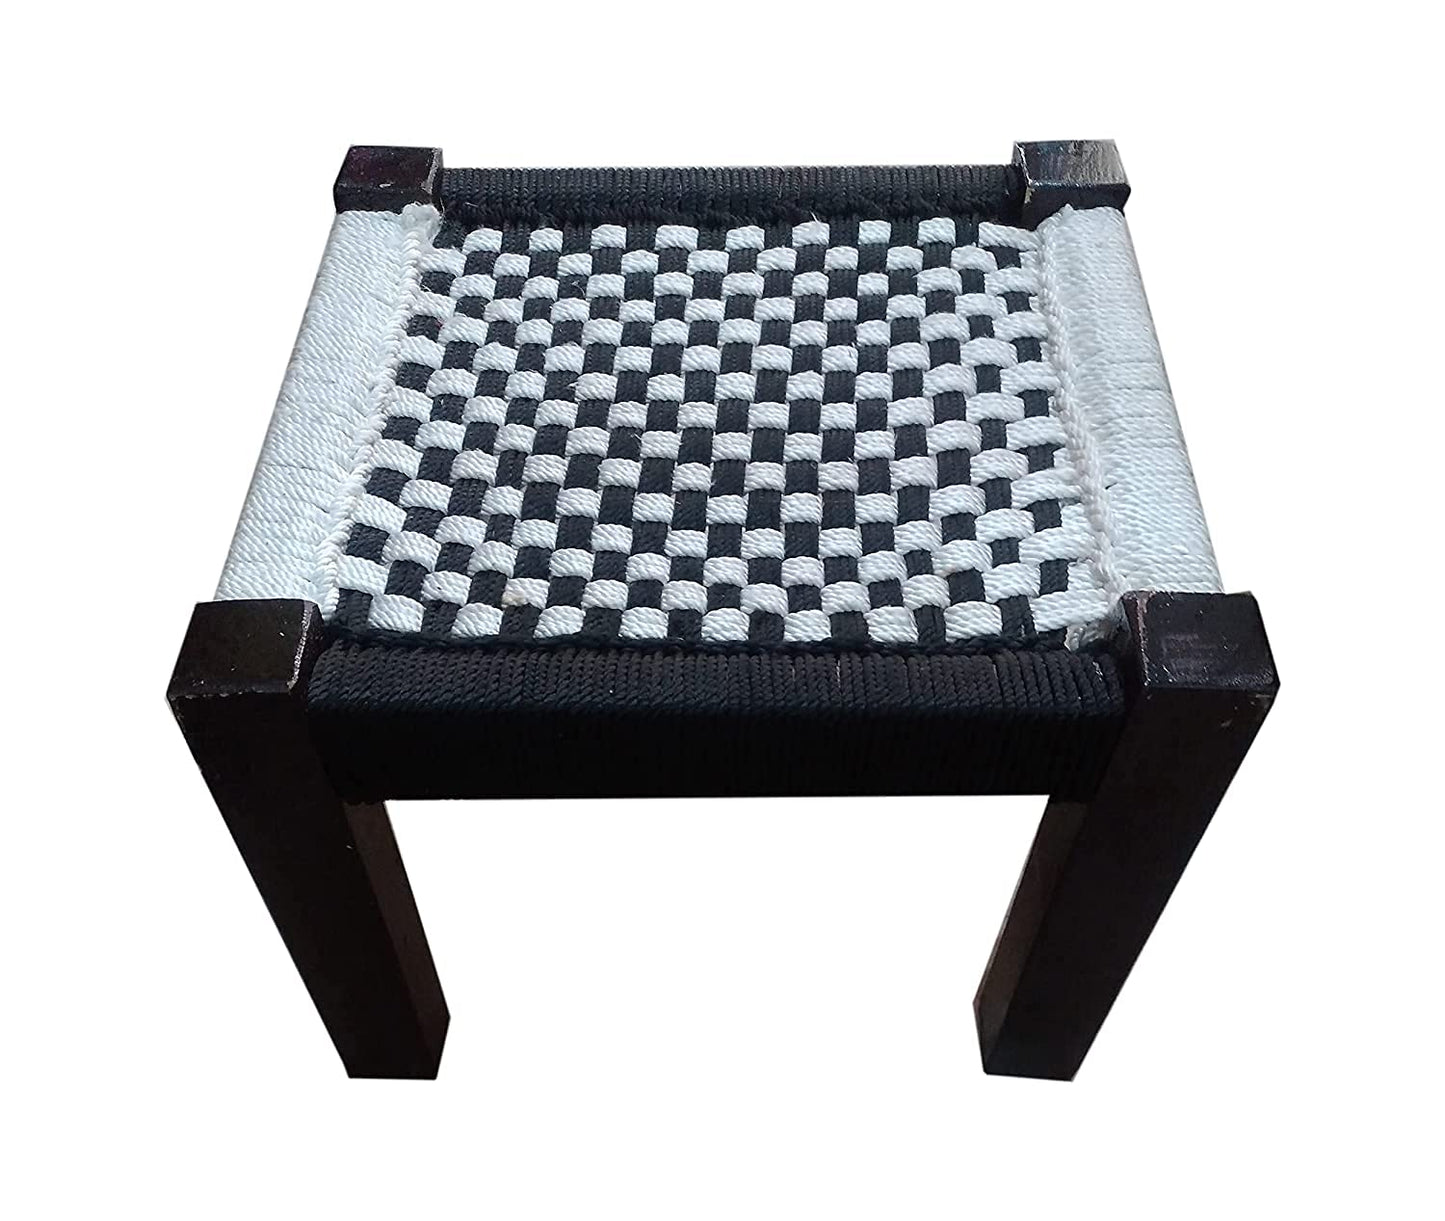 Wooden Chowki With Black and White Chess Board